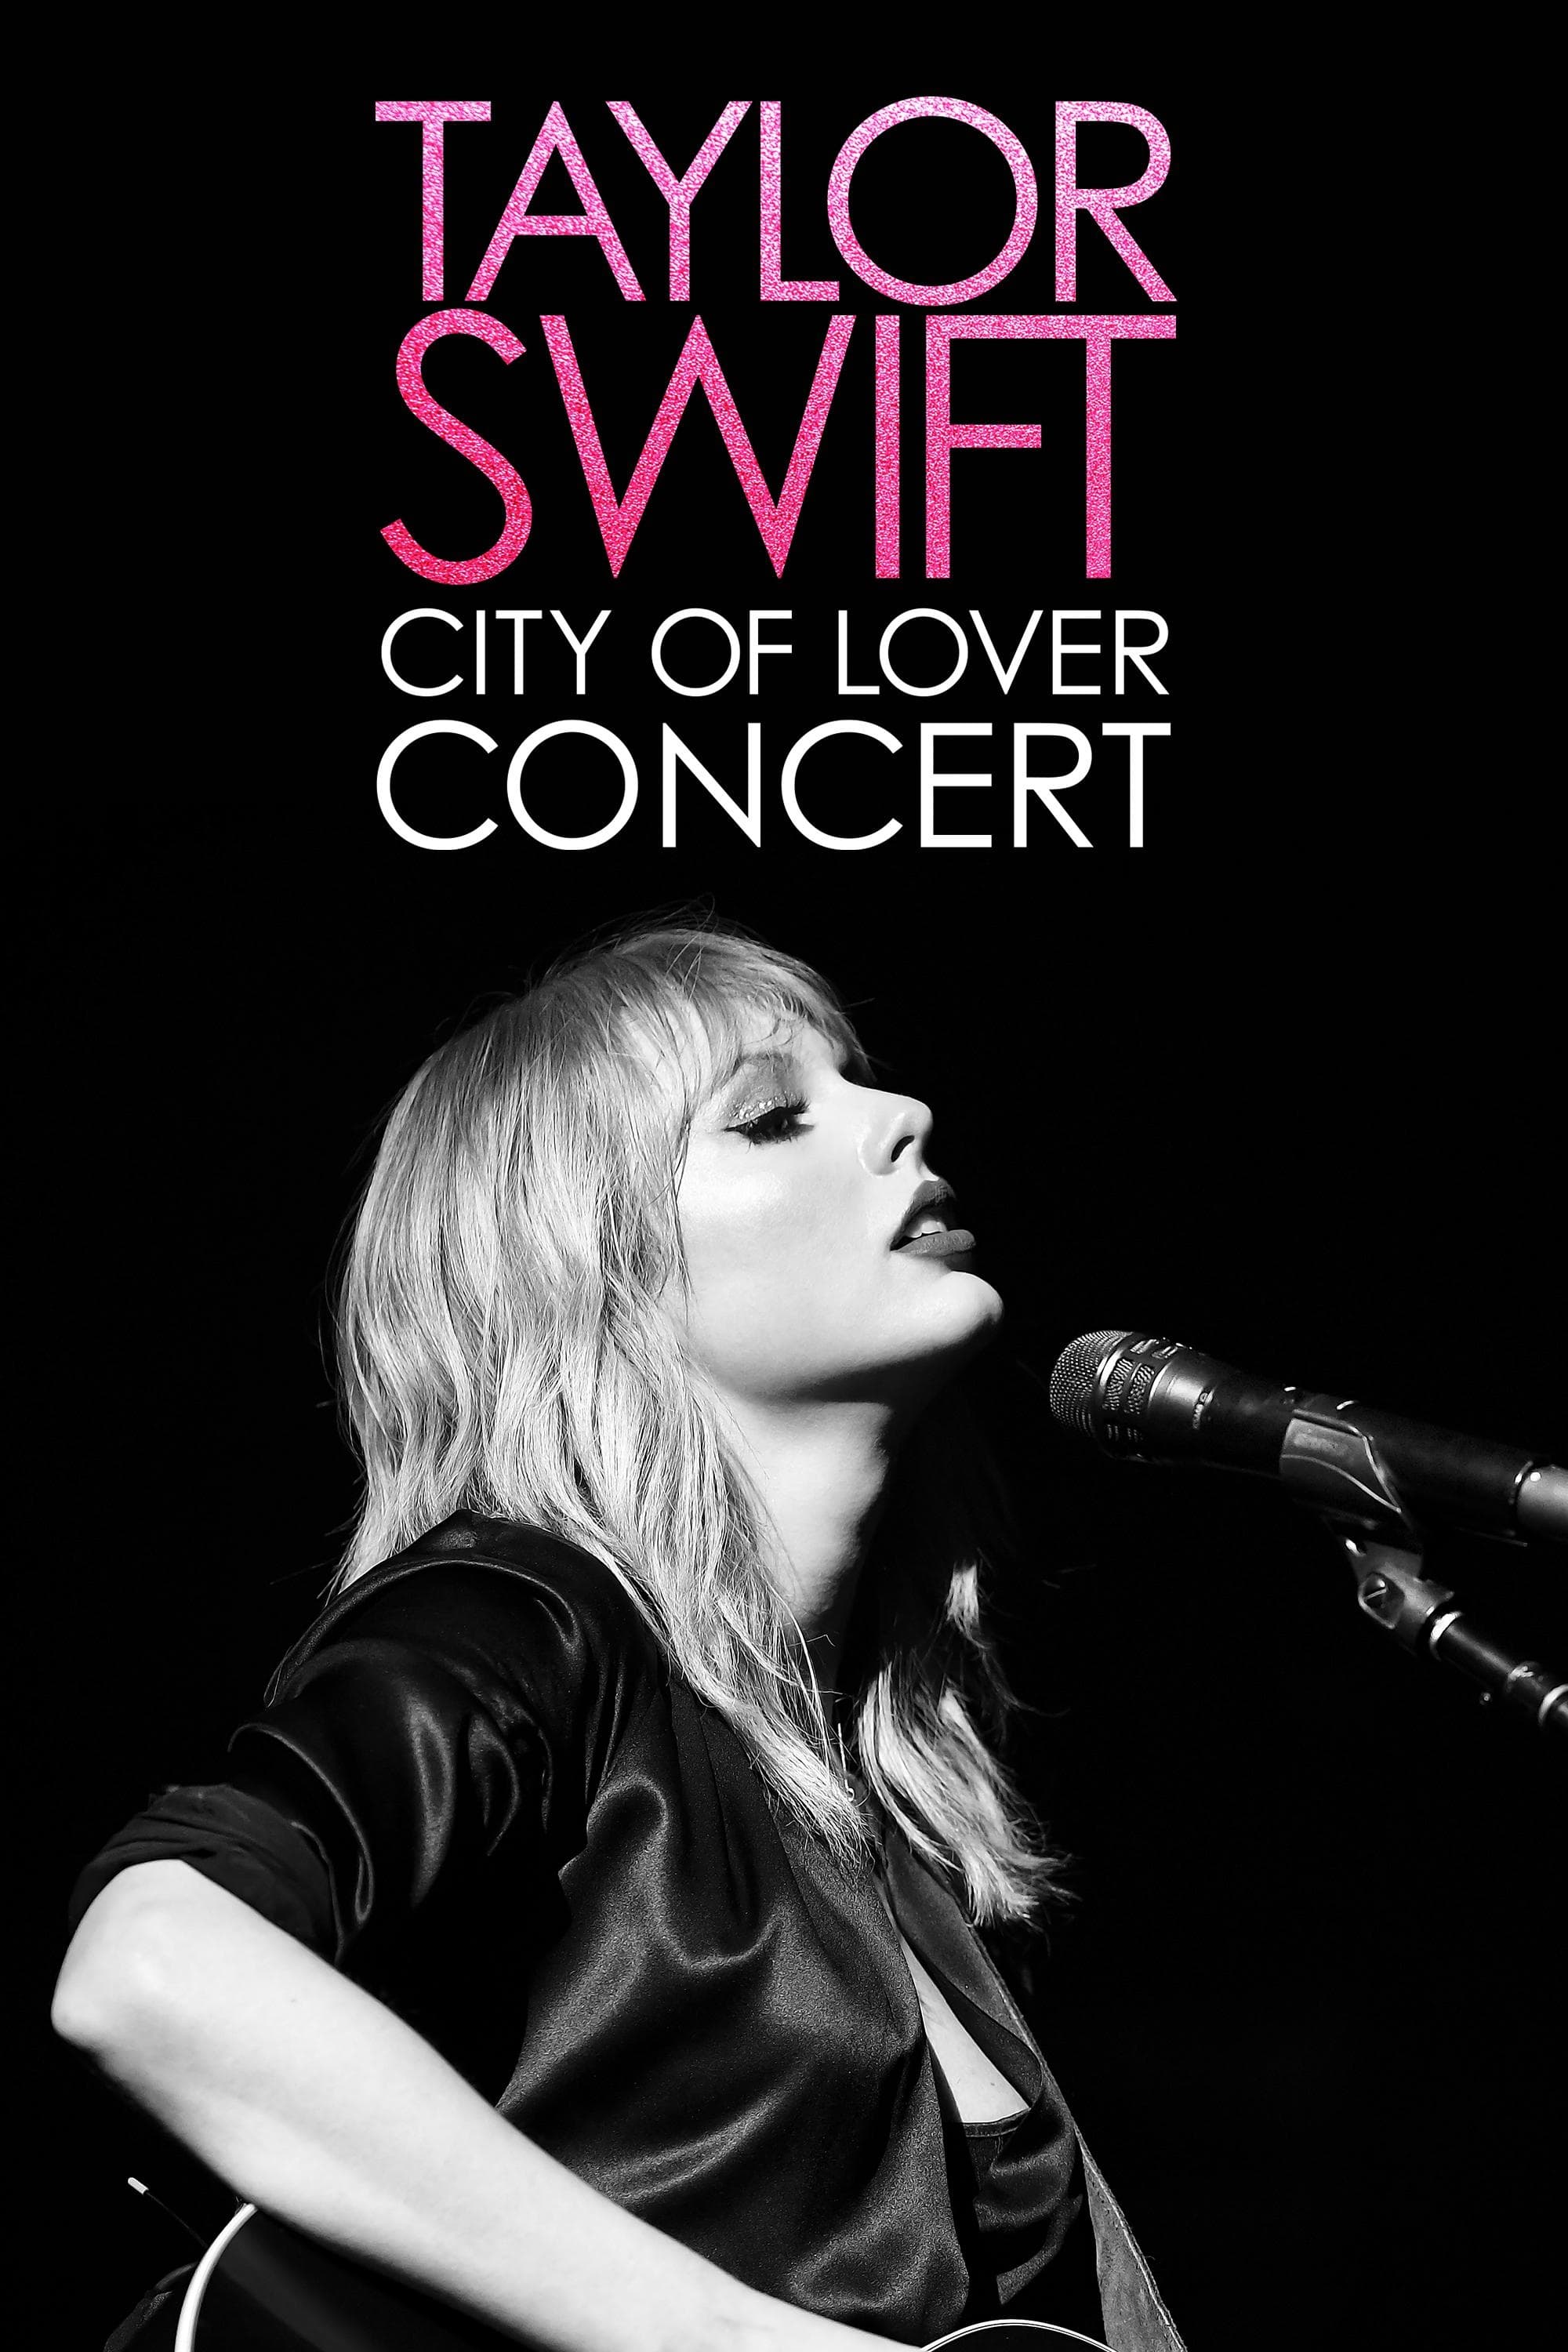 Taylor Swift - City of Lover Concert